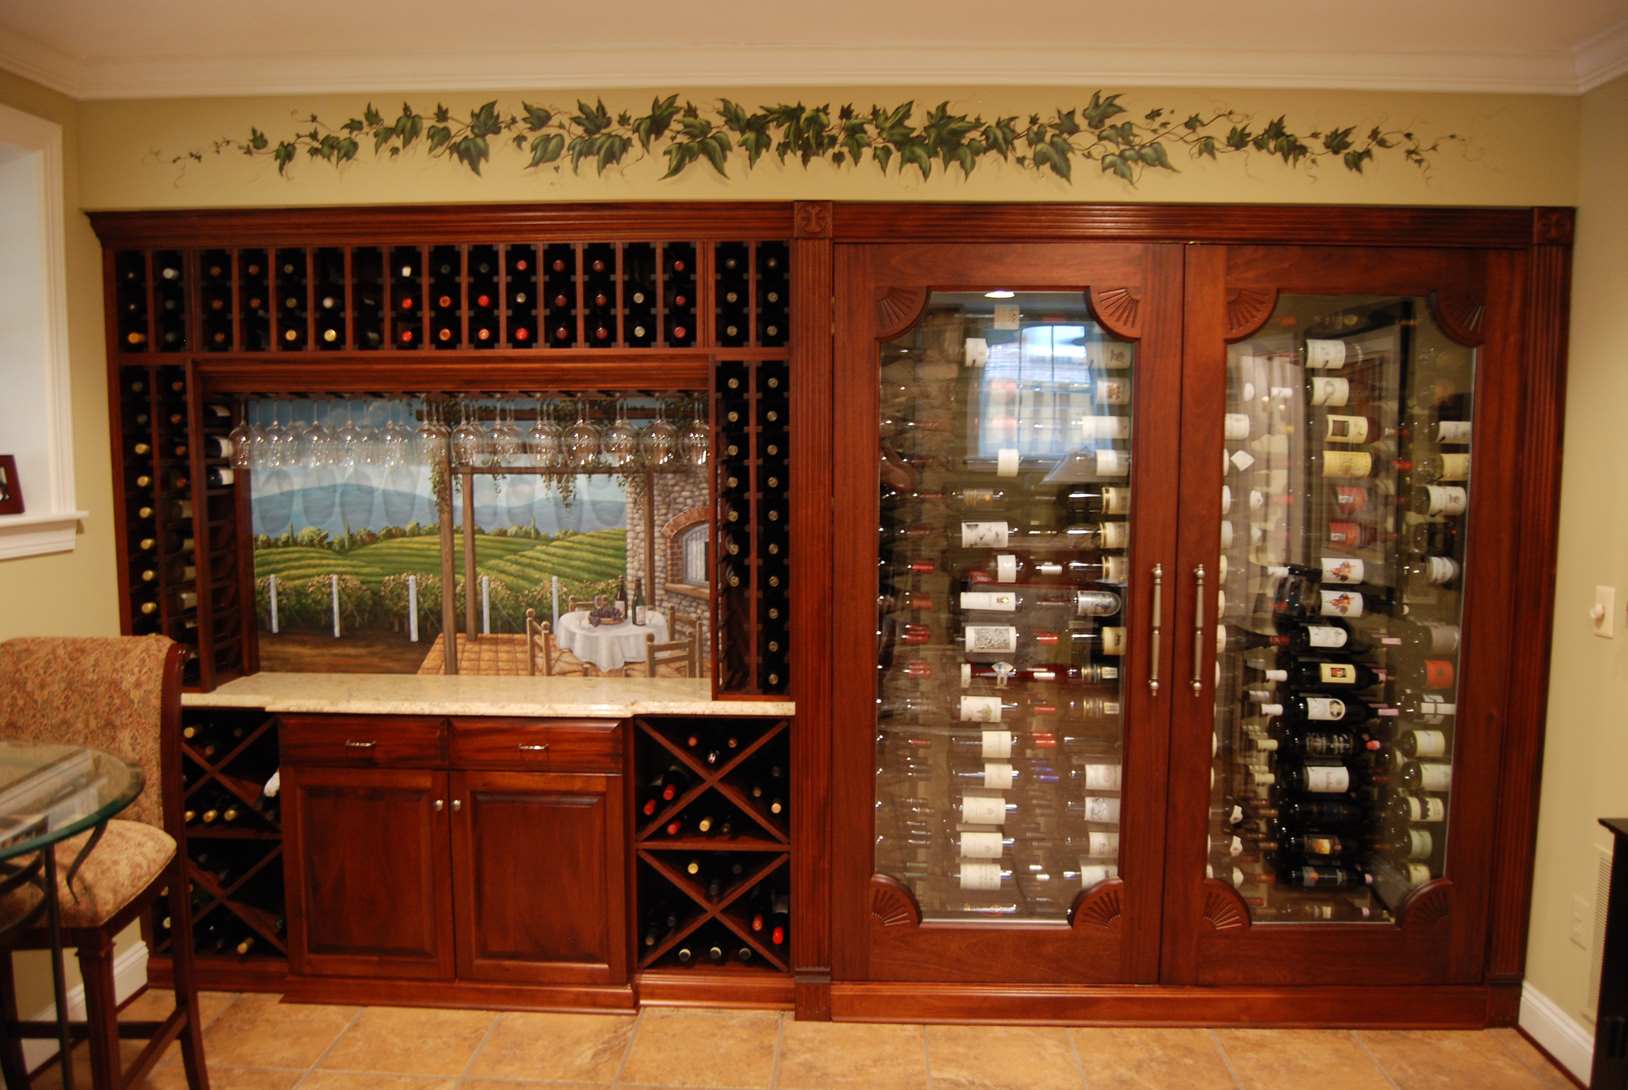 Wine Cellar Wall Window And Vines Mural 5